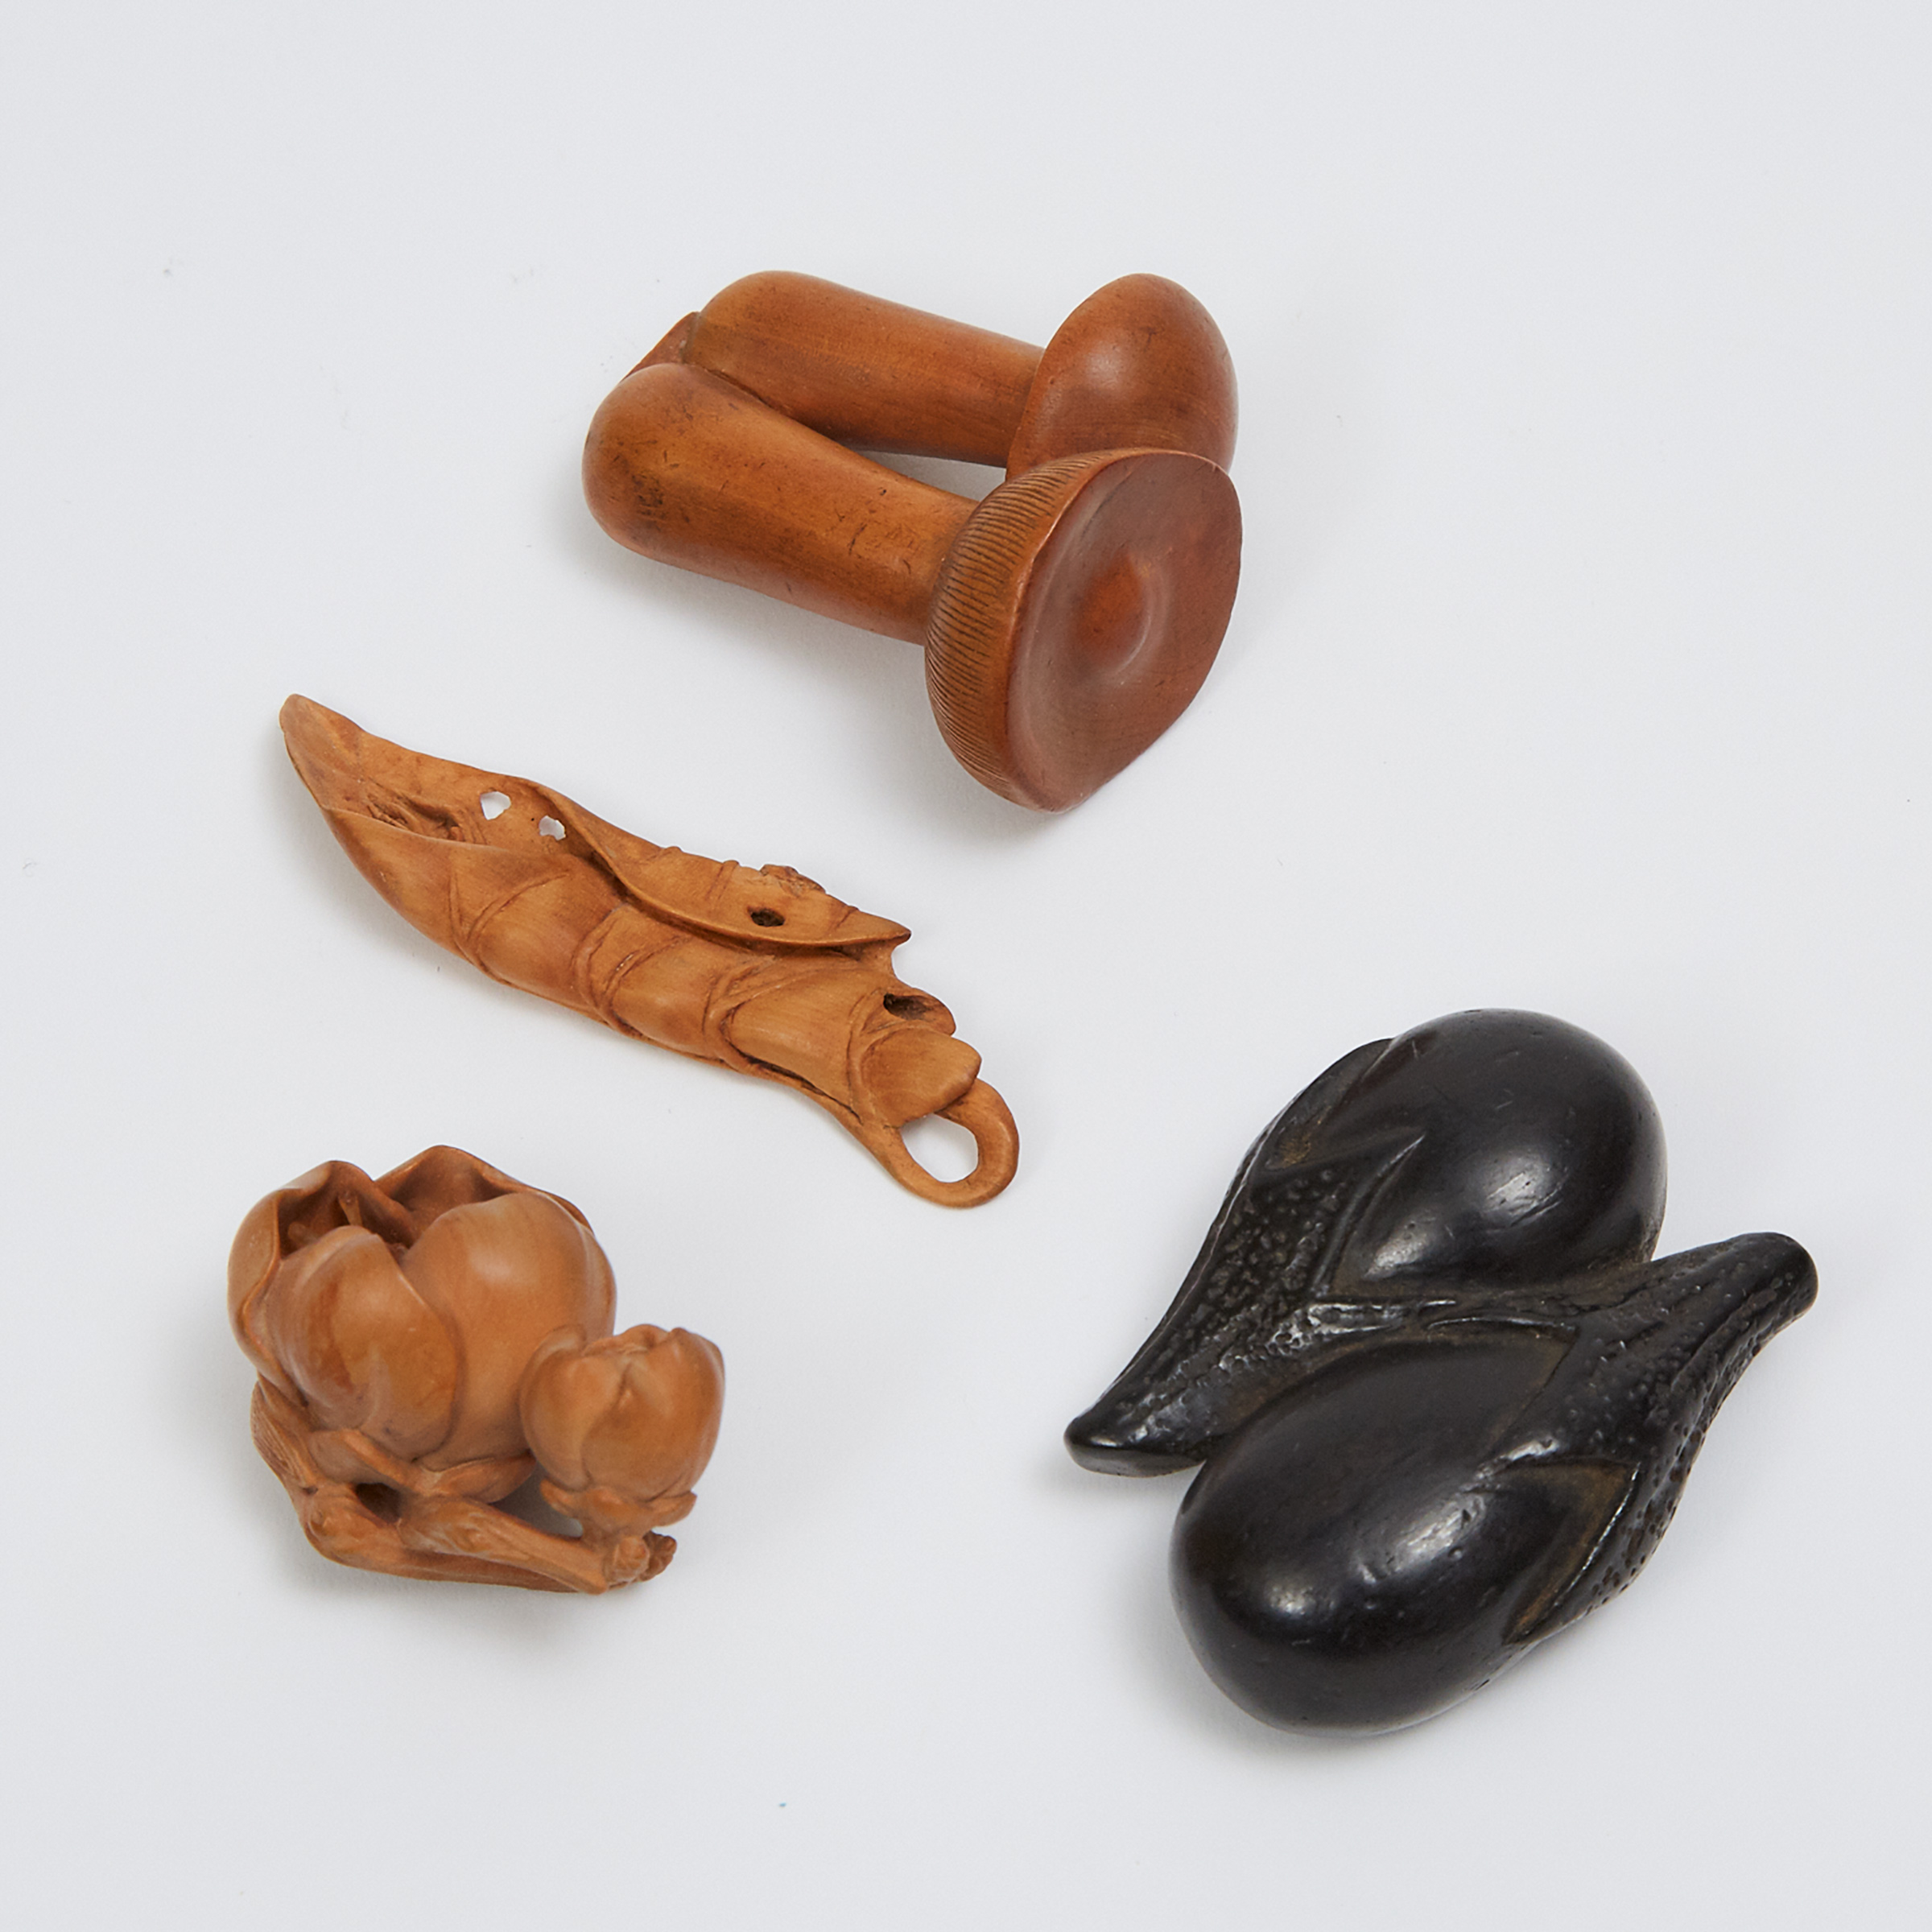 A Group of Four Boxwood and Ebony Netsuke of Vegetables, Cherry Blossoms, and a Leaf, Three Signed, 19th/20th Century